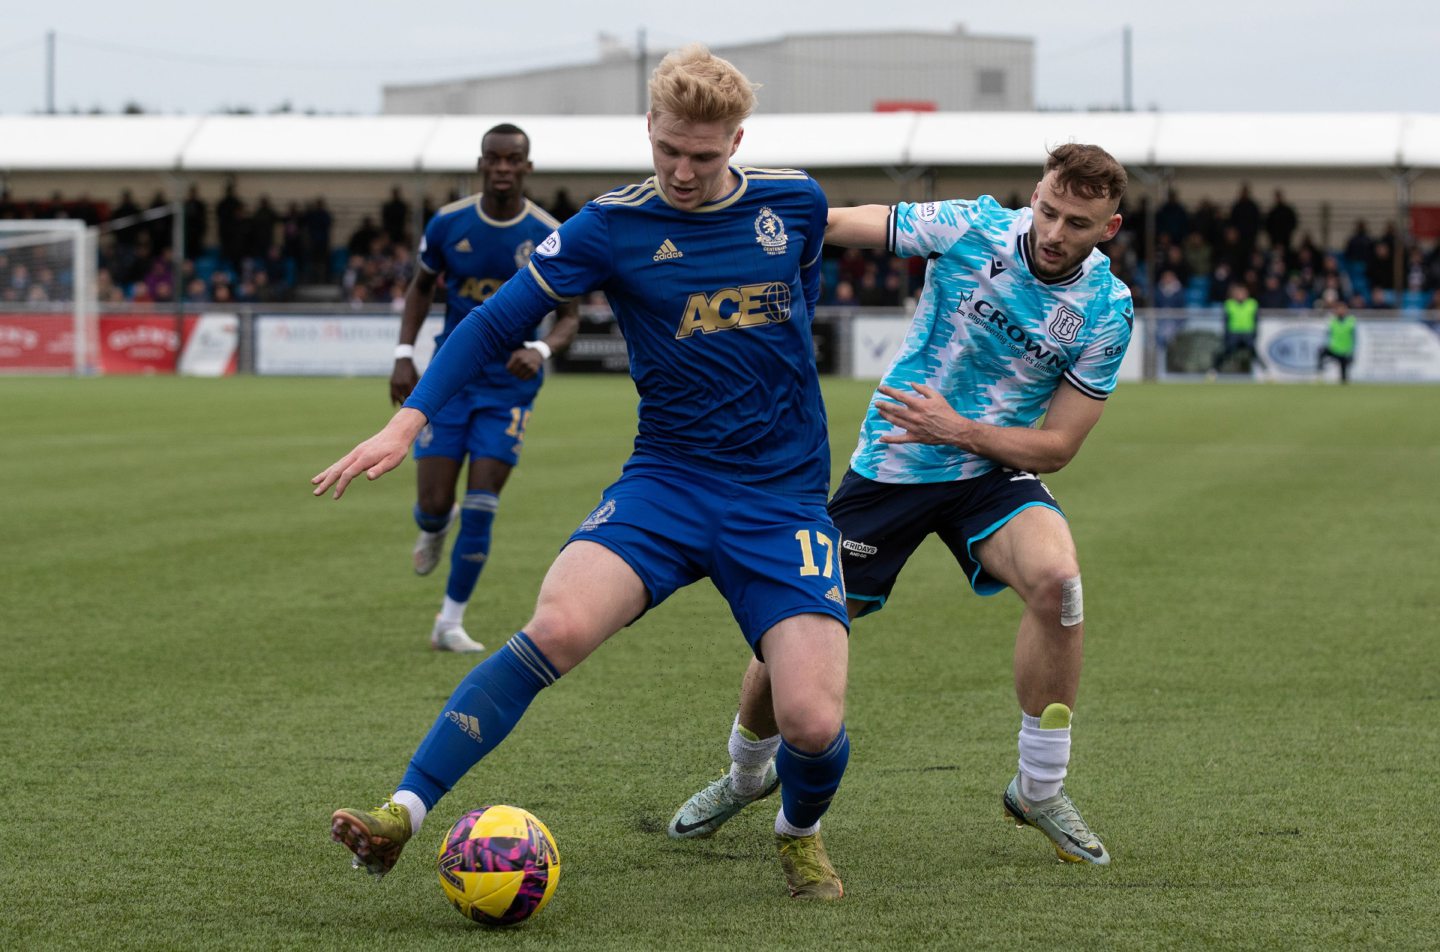 Luis Longstaff in action for Cove Rangers against Dundee. Image: SNS